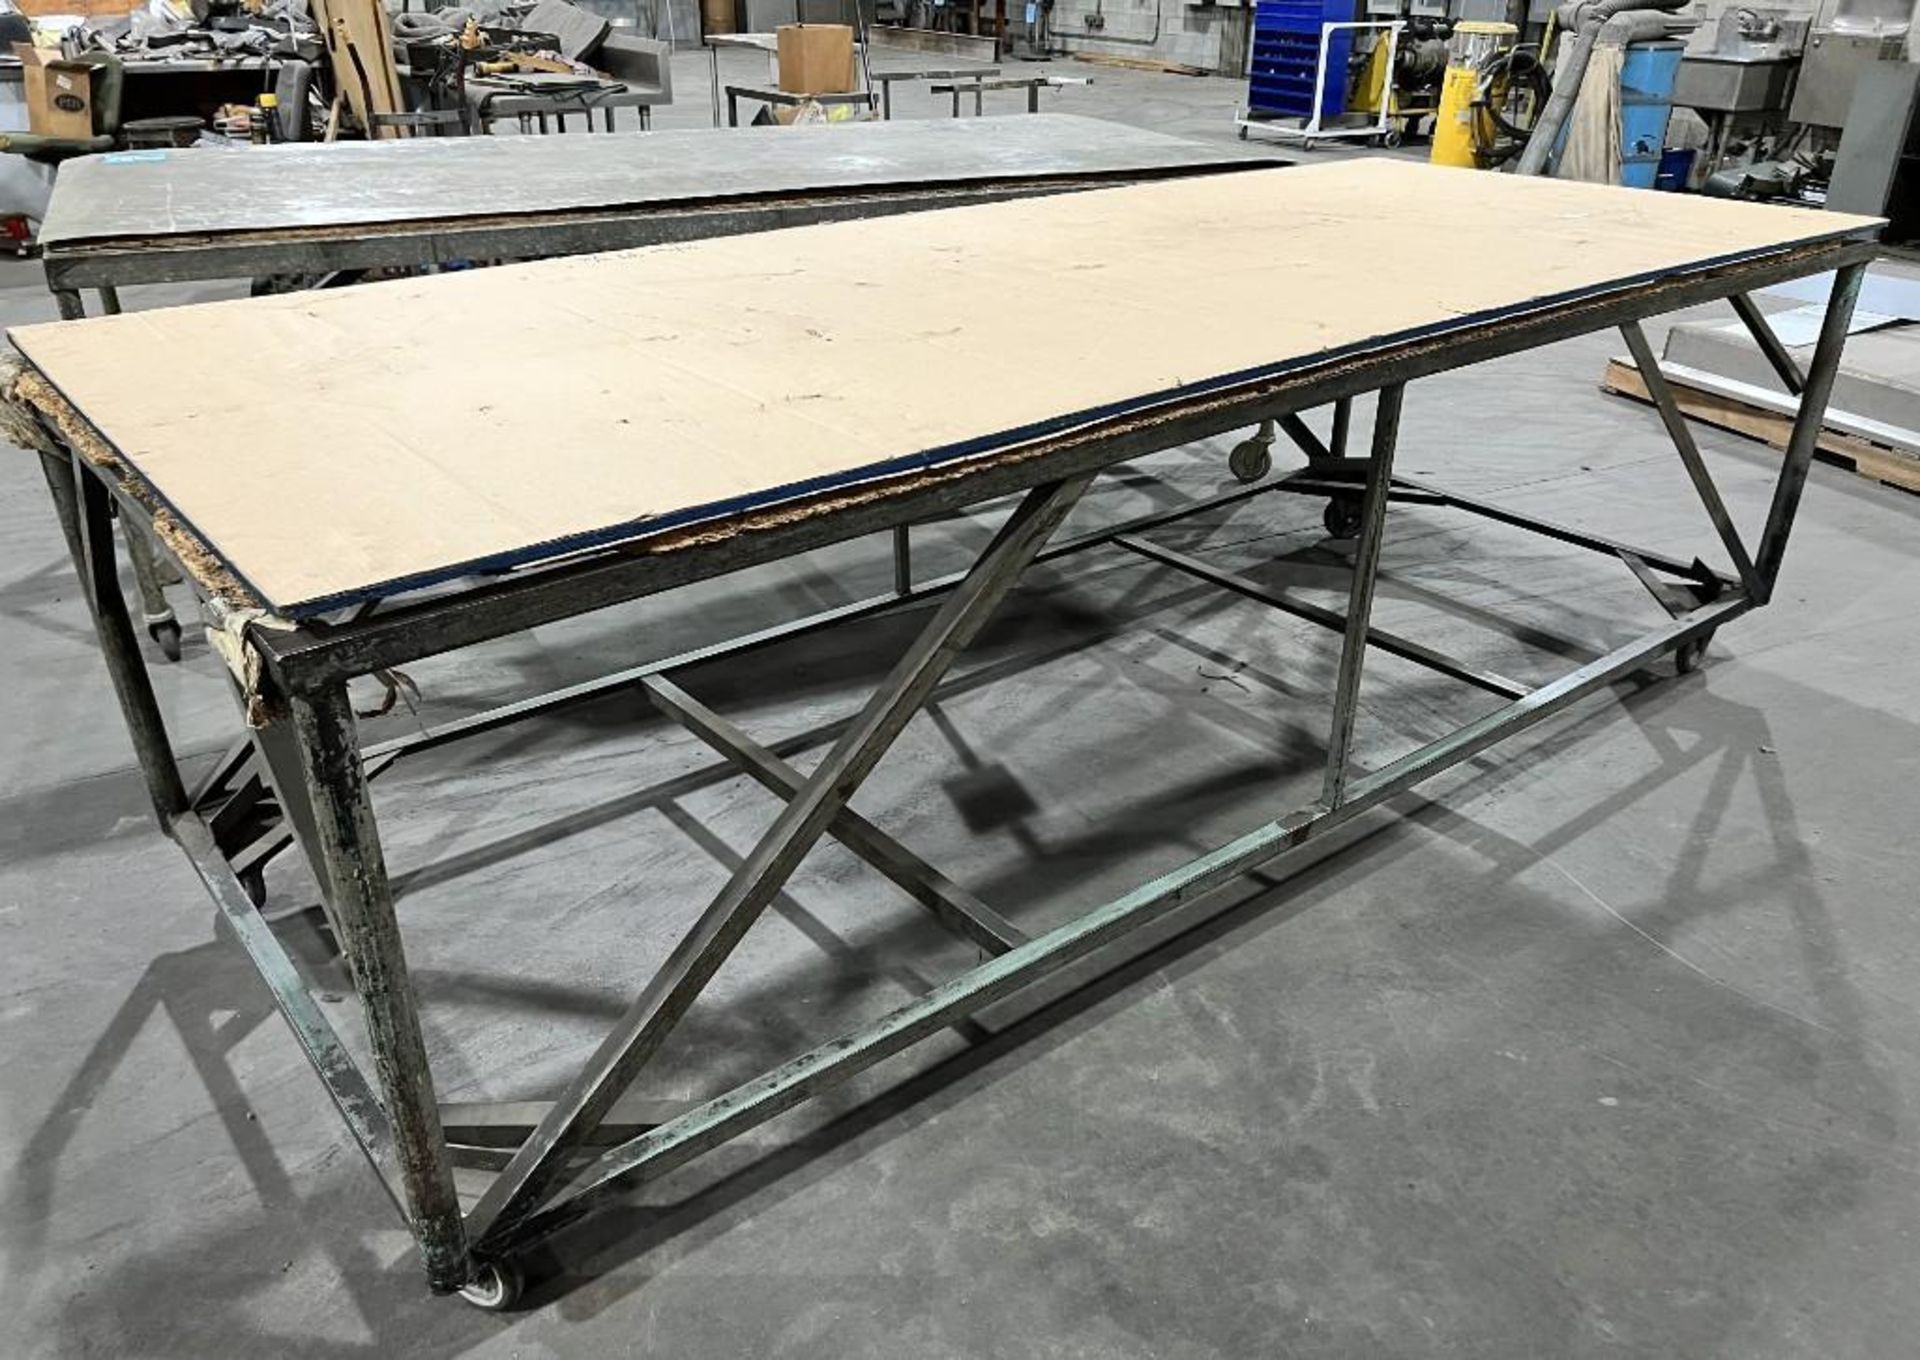 Lot Of (2) Portable Work Tables. Approximate 48" wide x 120" long x 36" tall. - Image 3 of 6